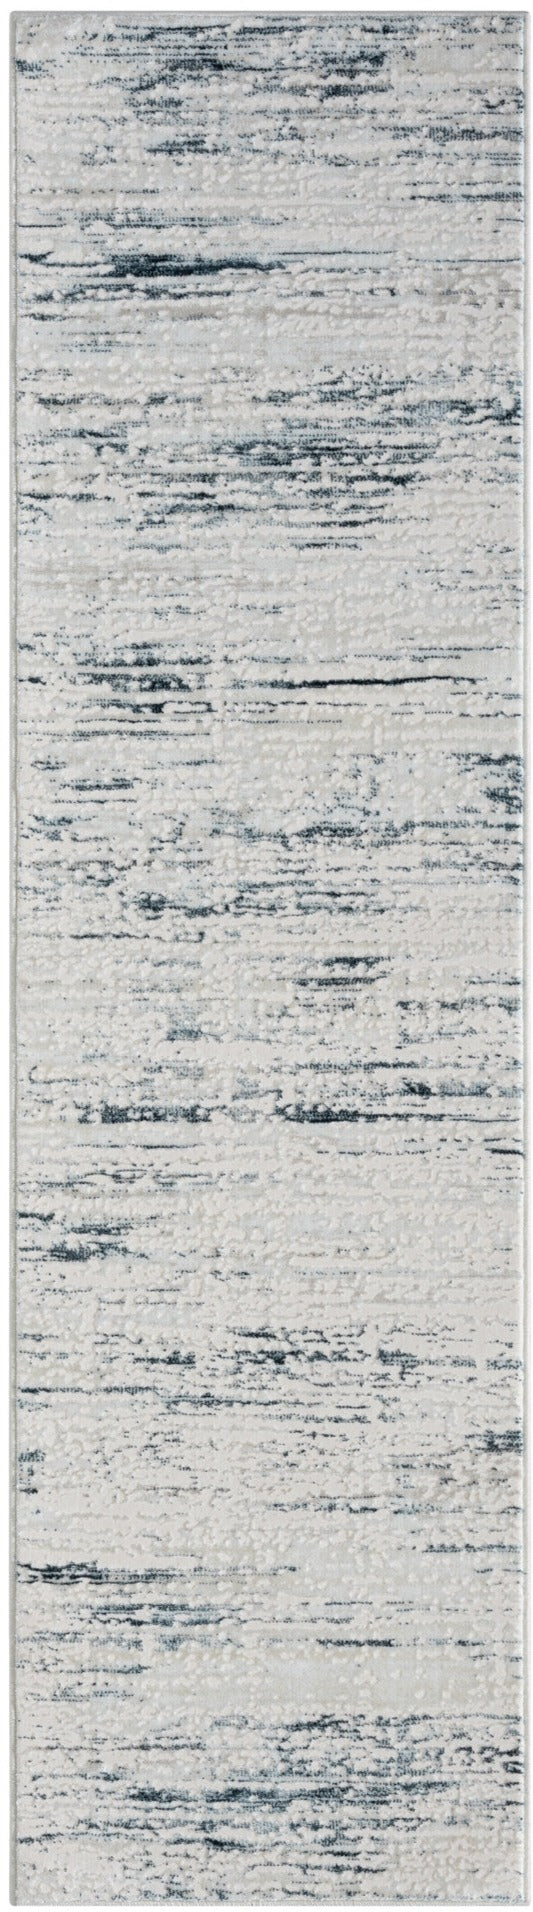 American cover design / Persian weavers Boutique 455 Frost Rug